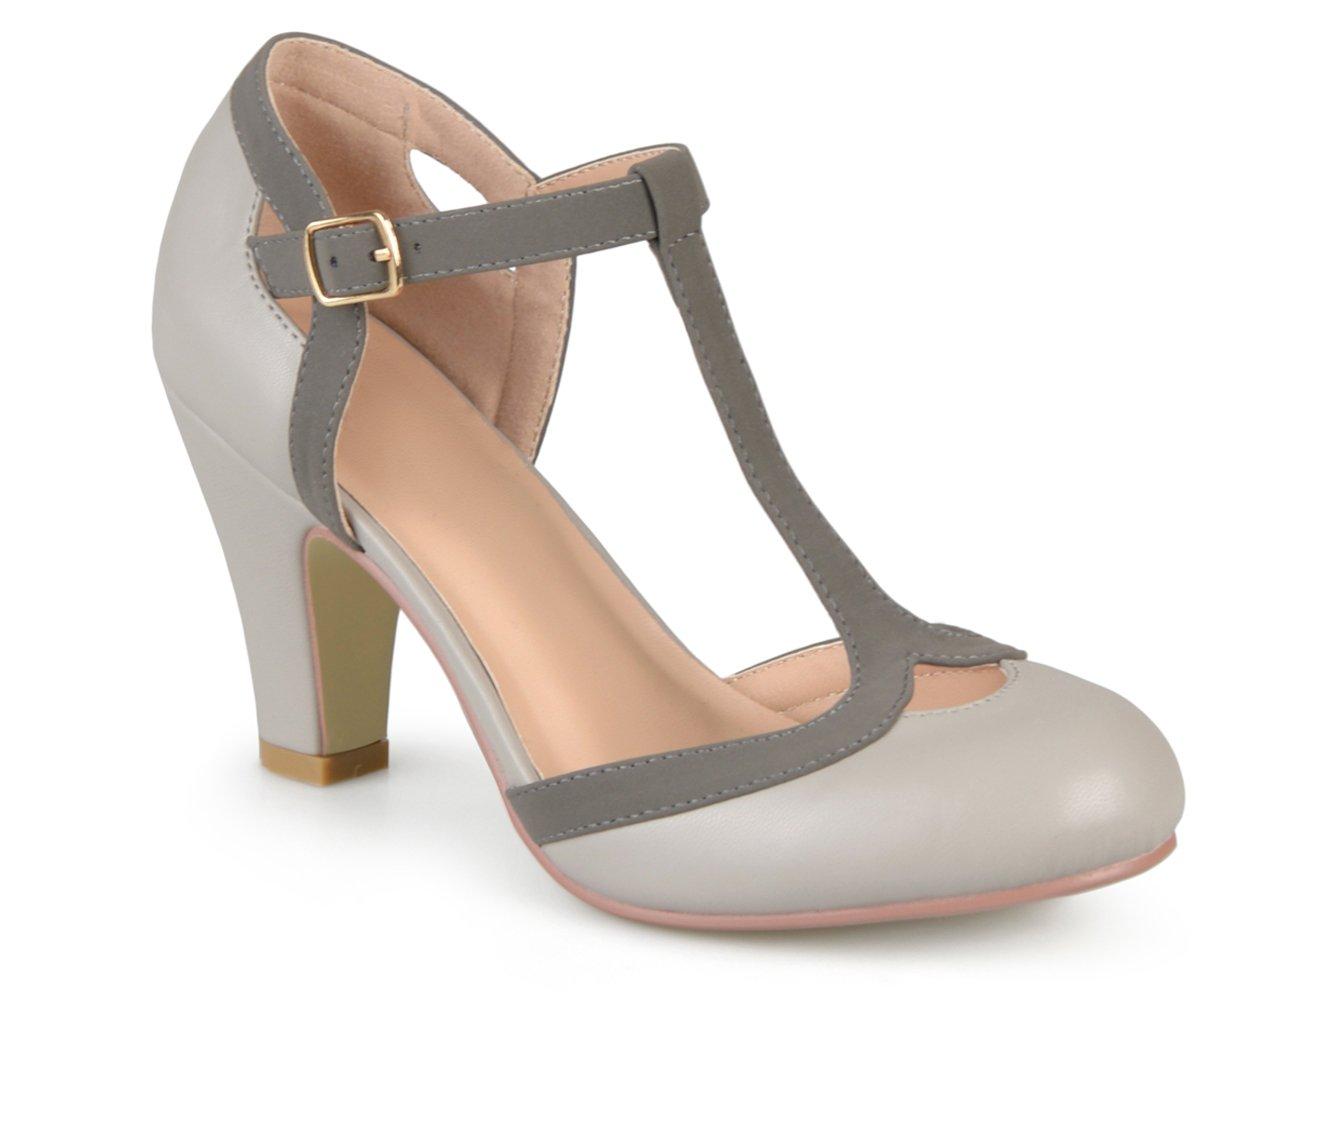 Women's Journee Collection Olina Pumps